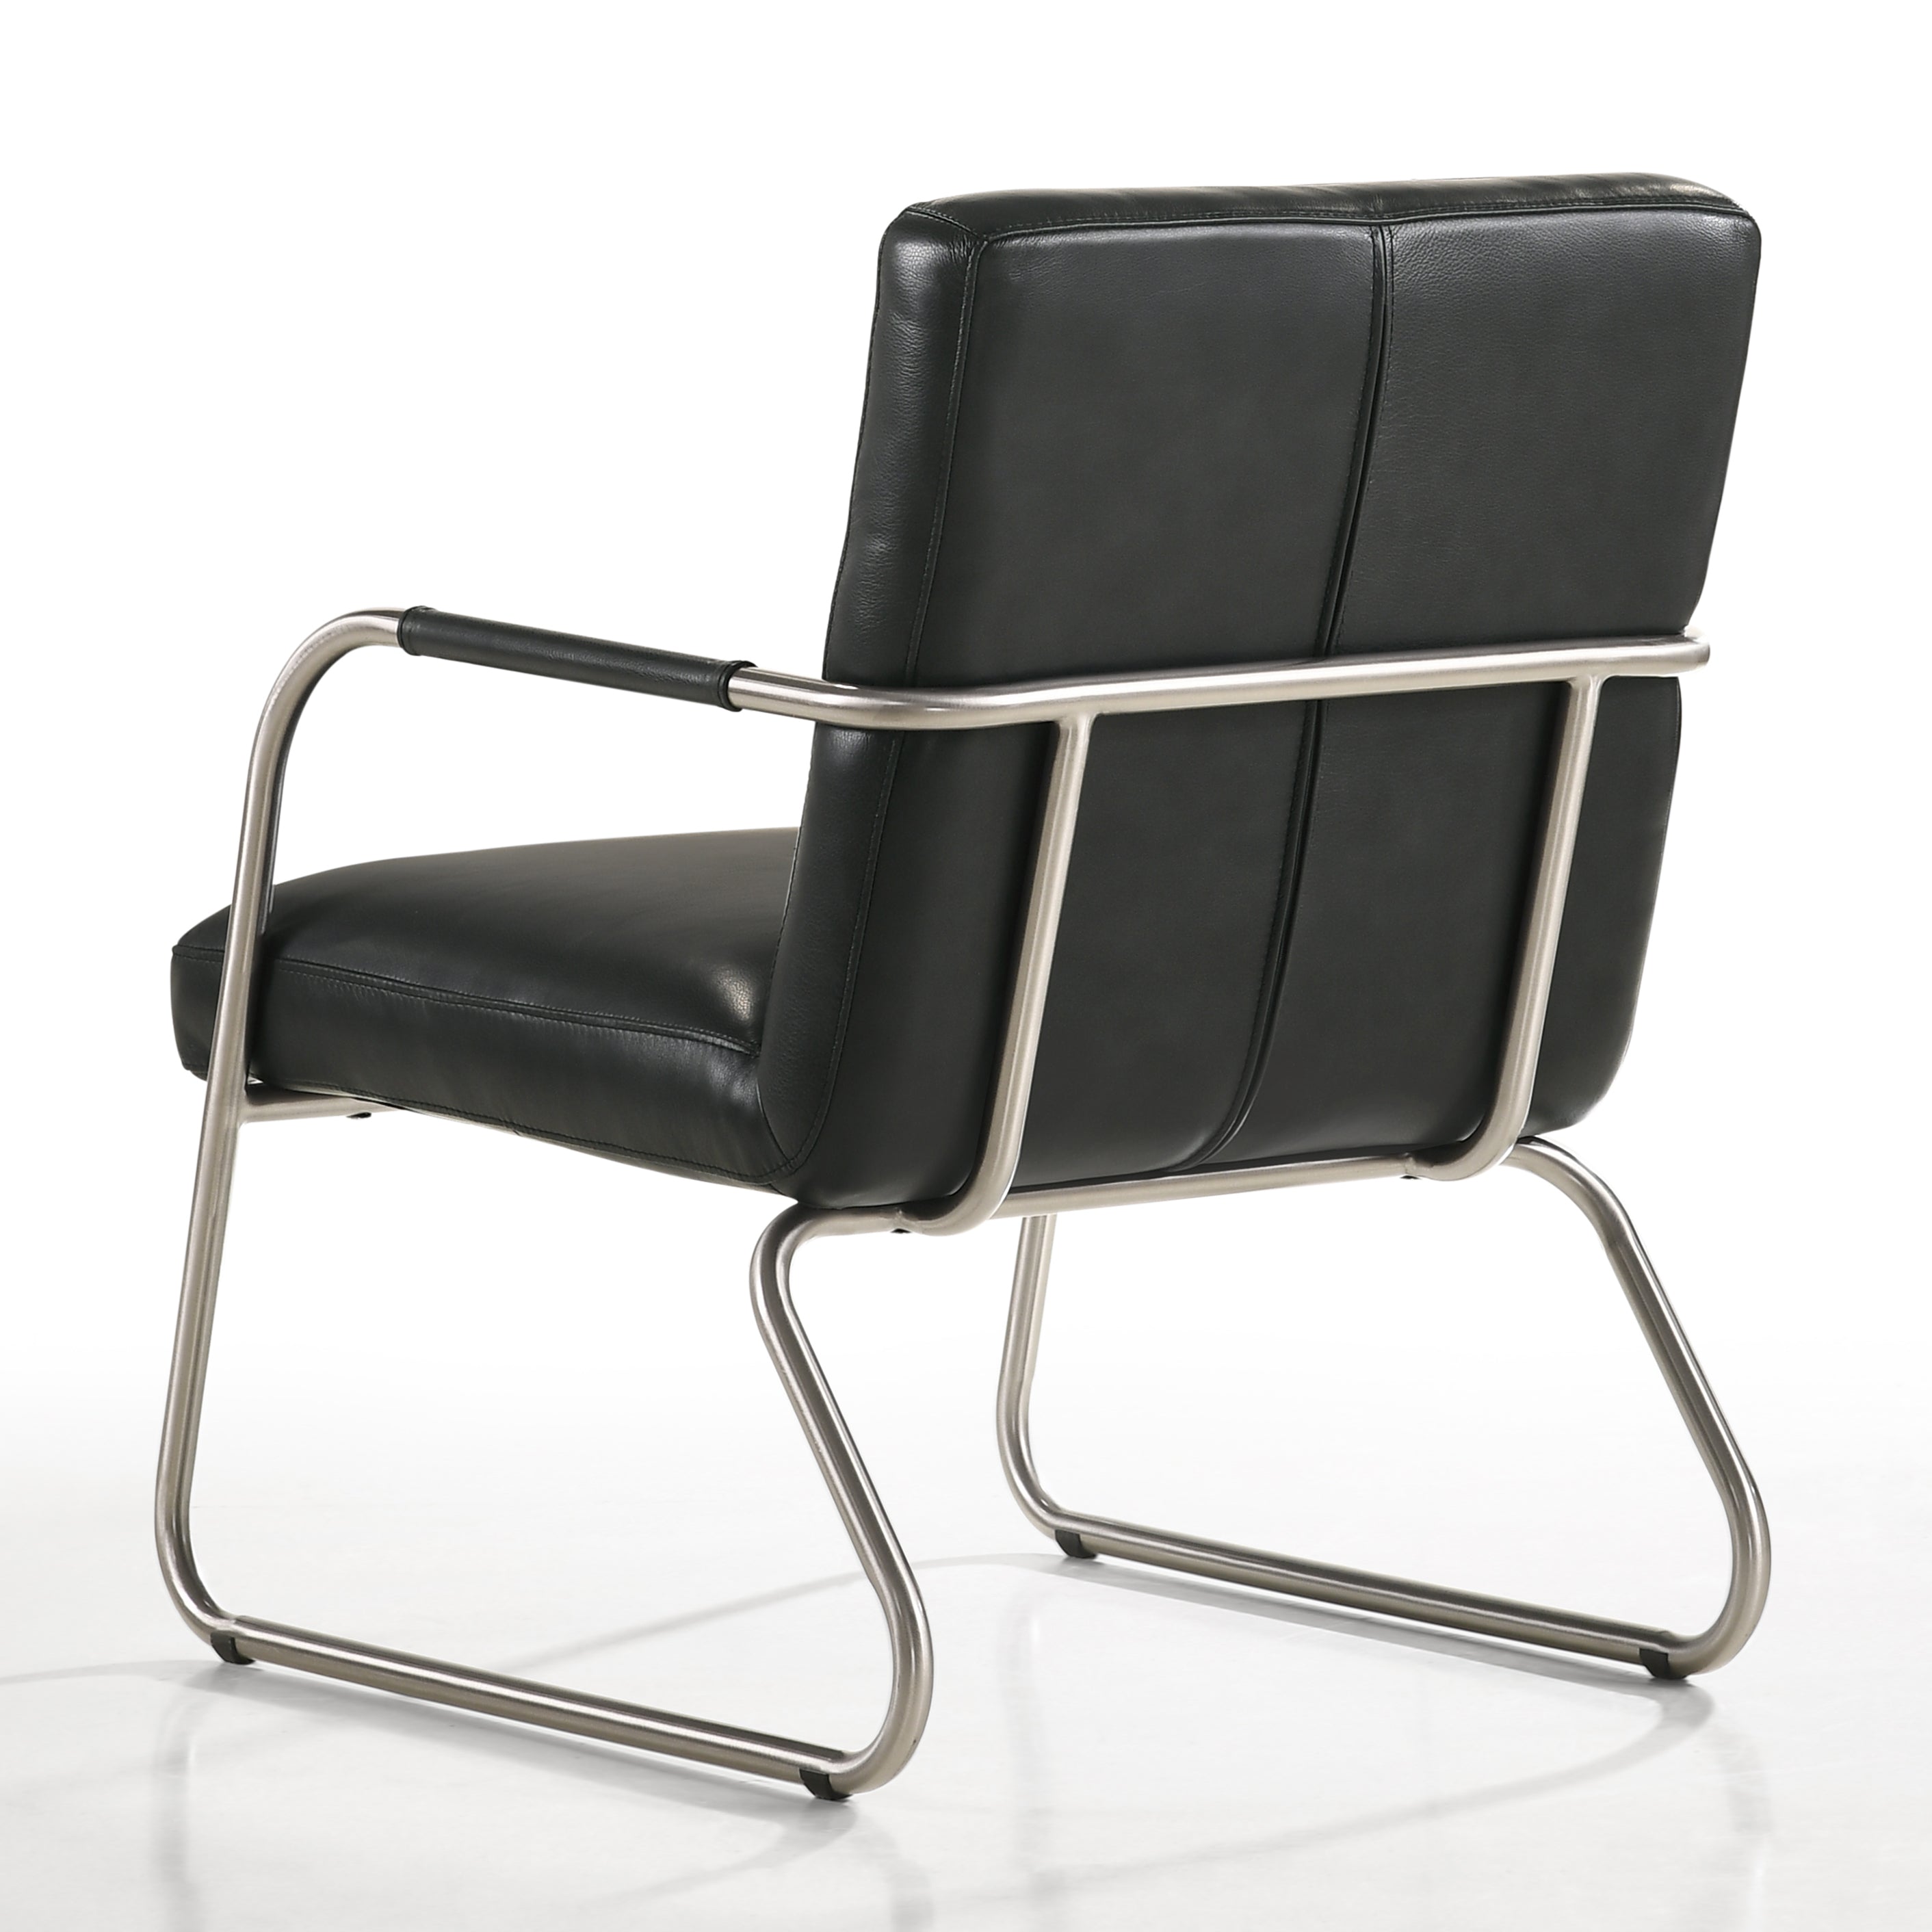 Spencer Stainless Steel Leather Lounge Accent Chair, Black